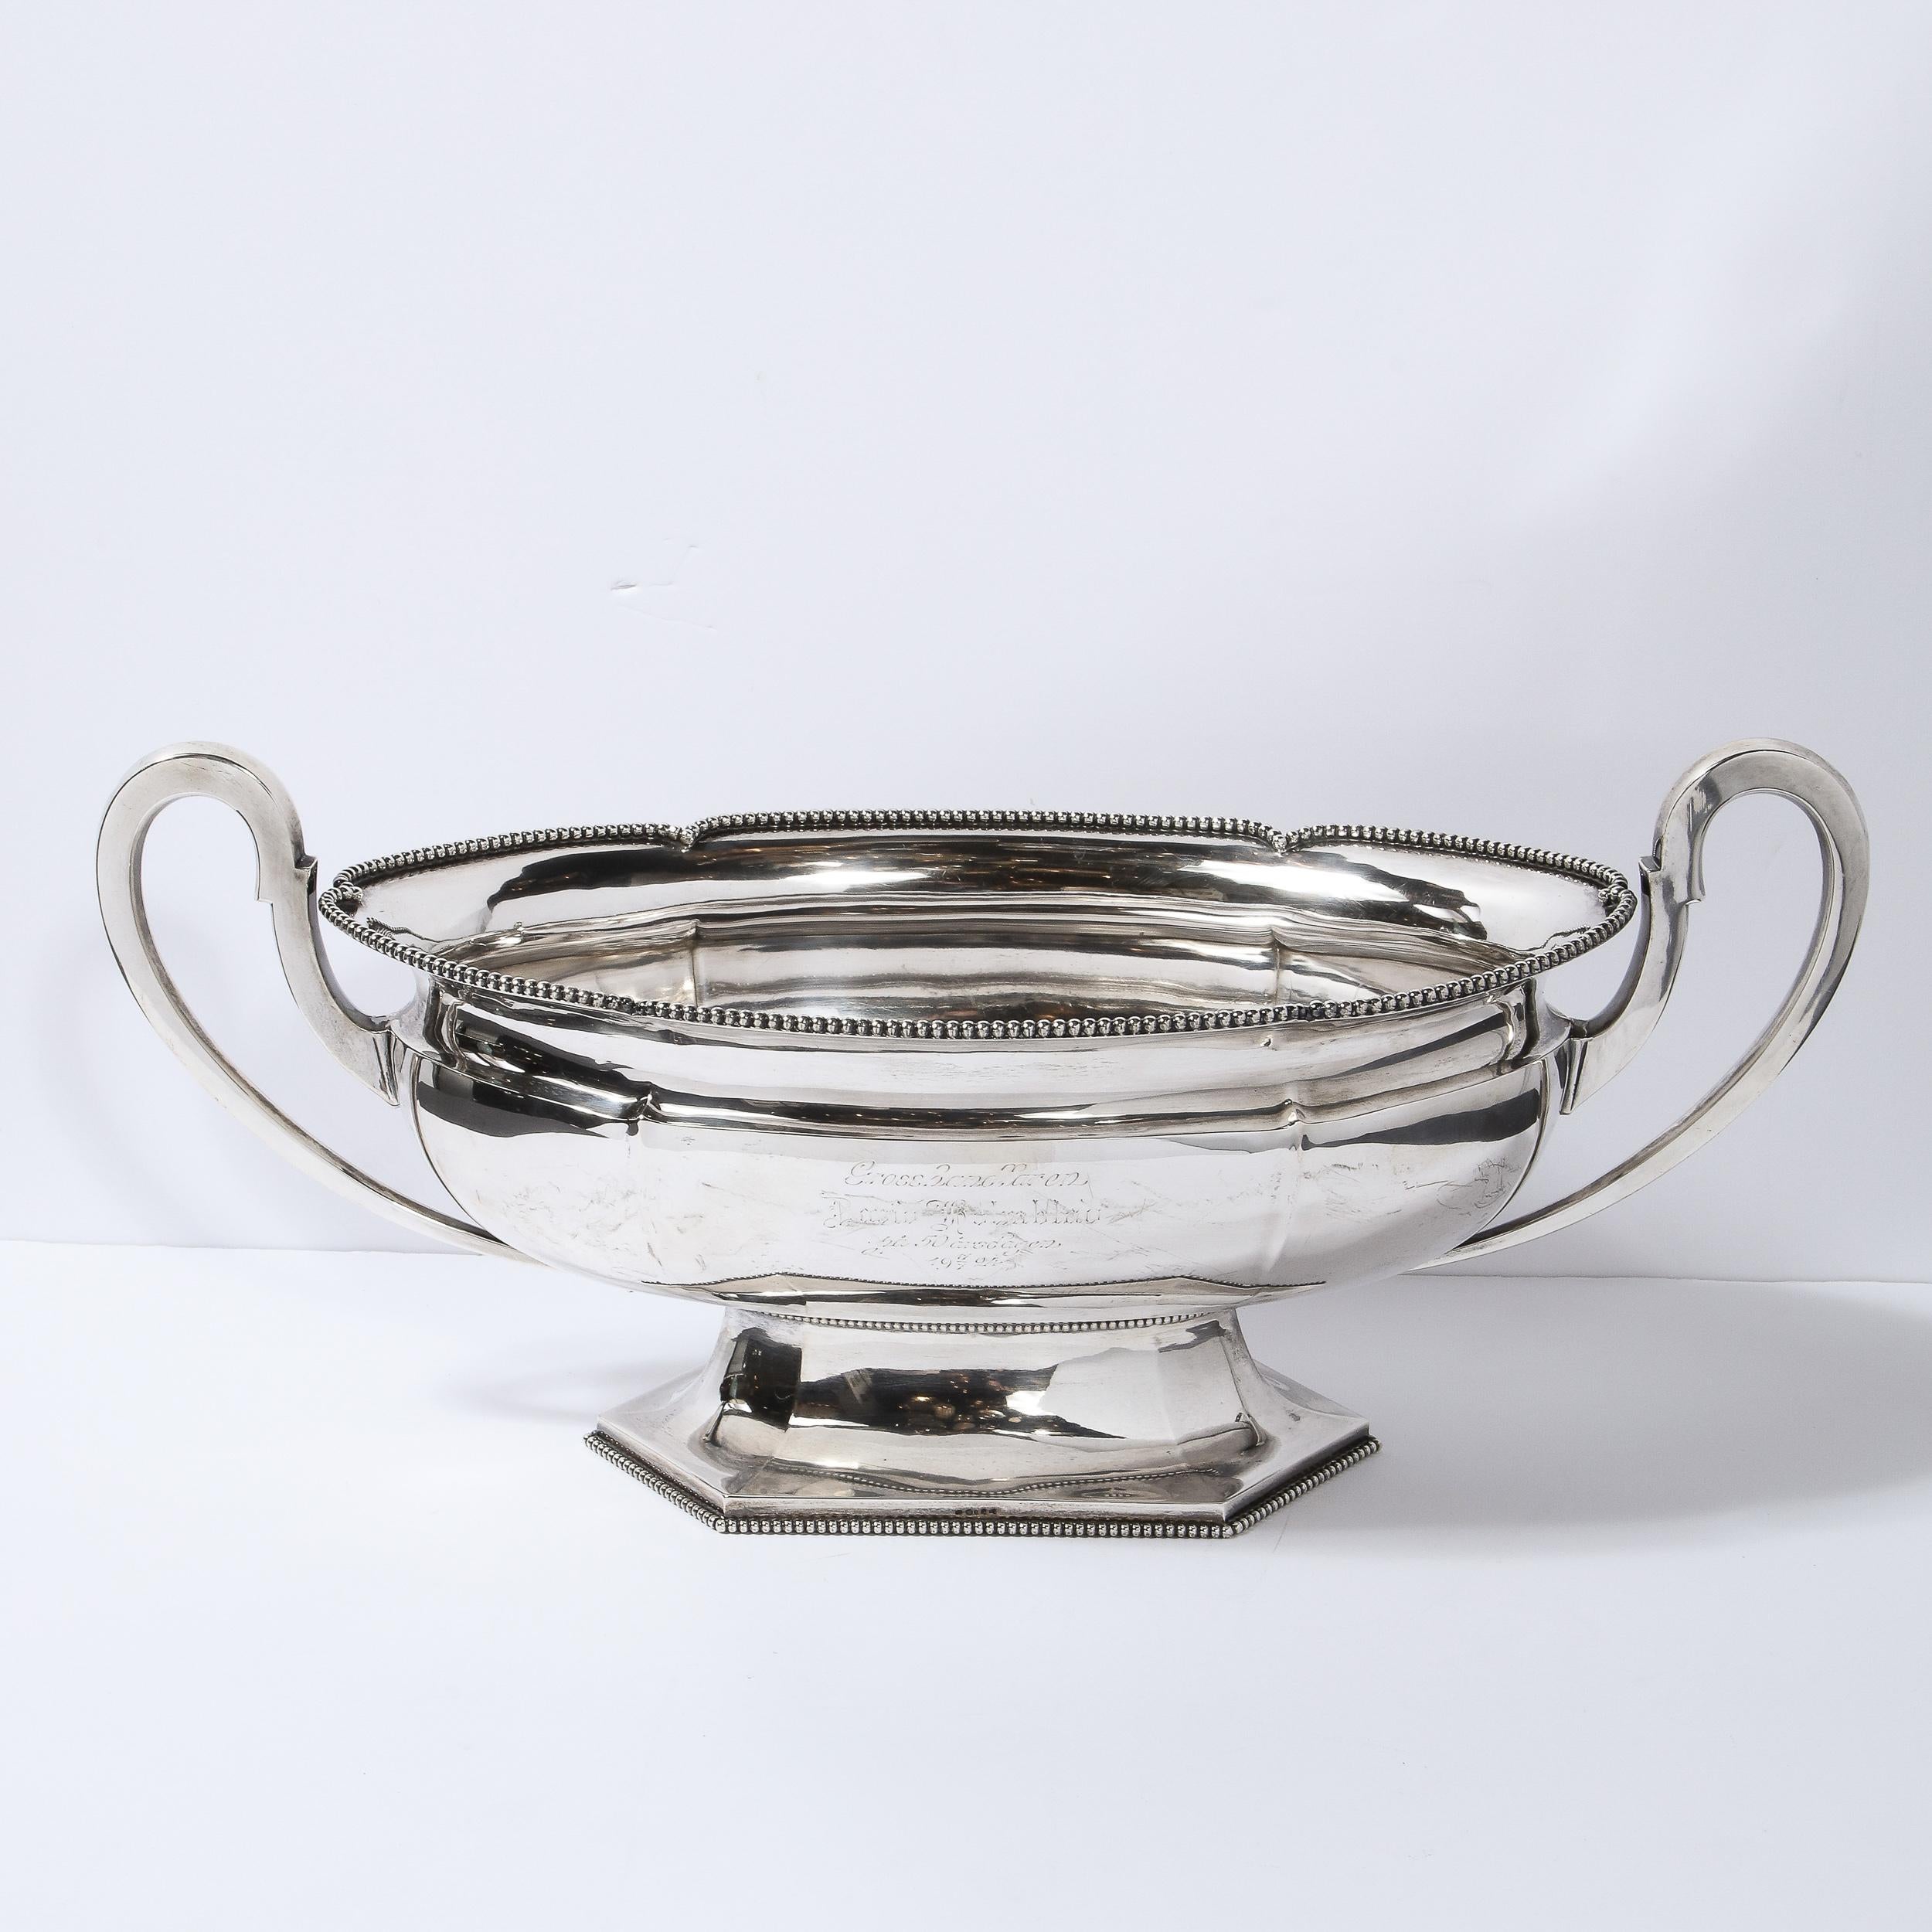 This elegant Art Deco trophy bowl was realized in Sweden in 1924. It offers a sculptural oval body sitting on a hexagonal faceted base with beaded detailing around the perimeter- all in lustrous silver plate. The top of the piece also has beaded